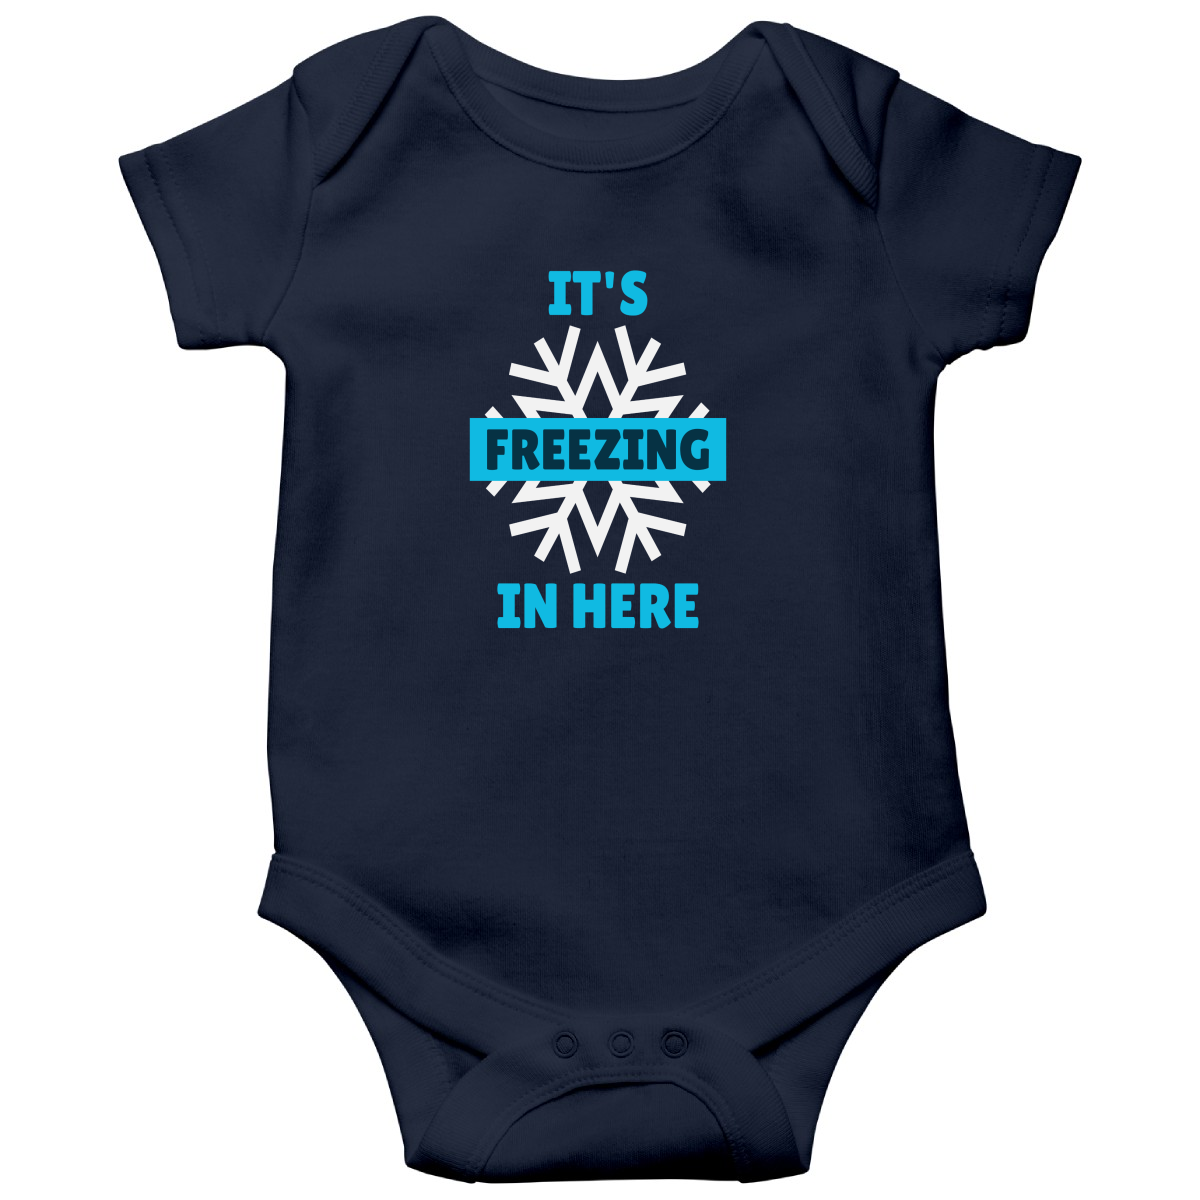 It's Freezing In Here! Baby Bodysuits